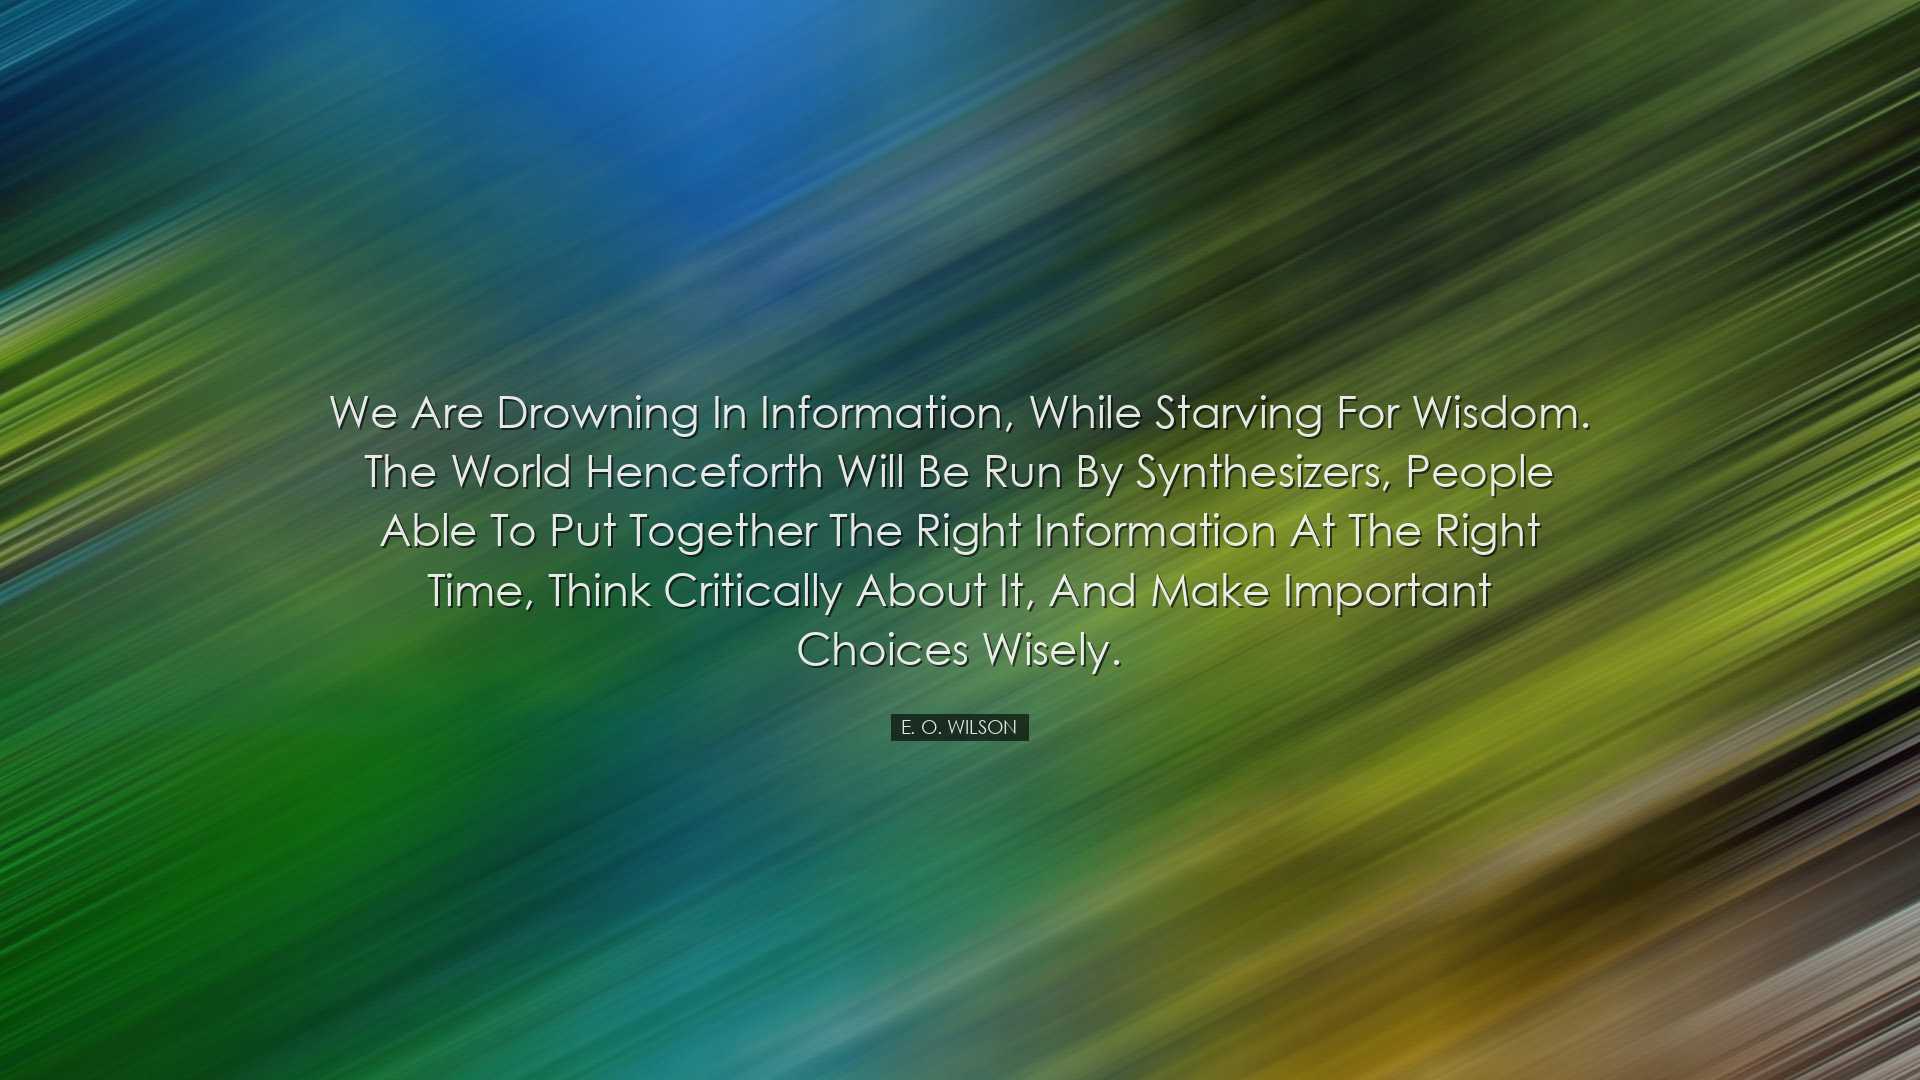 We are drowning in information, while starving for wisdom. The wor